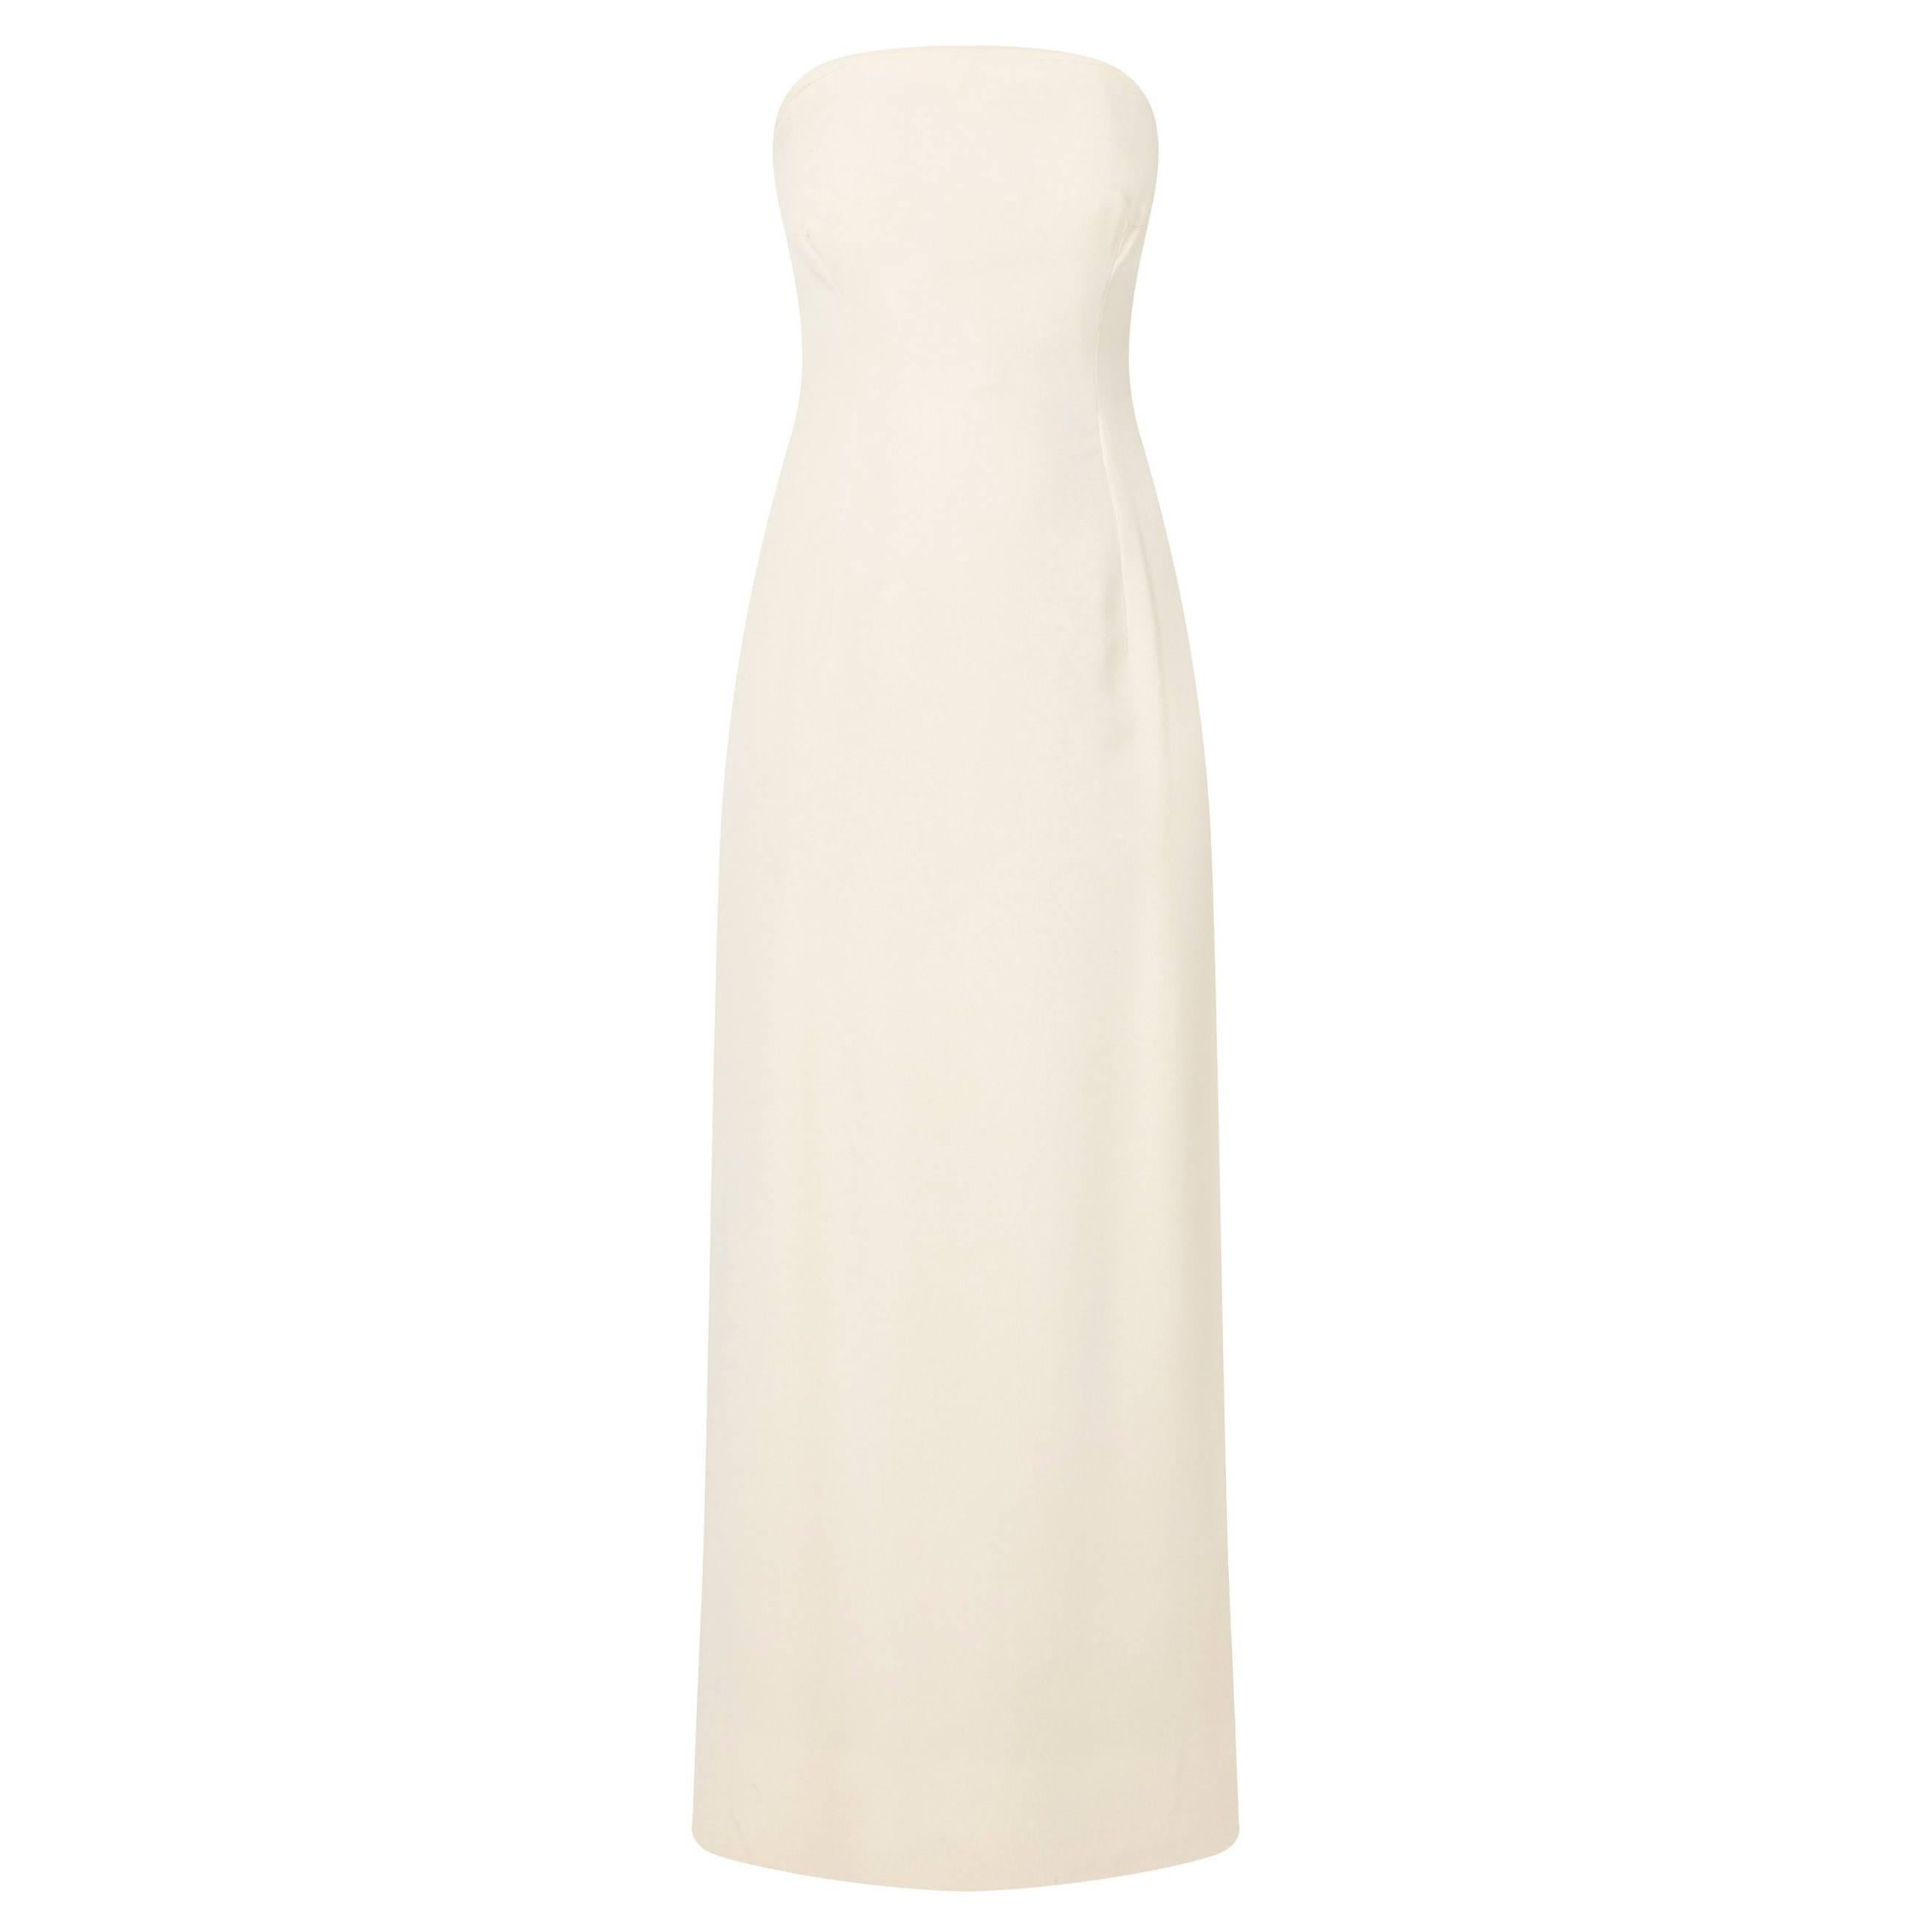 Jacques Griffe haute couture ivory dress, circa 1960 For Sale